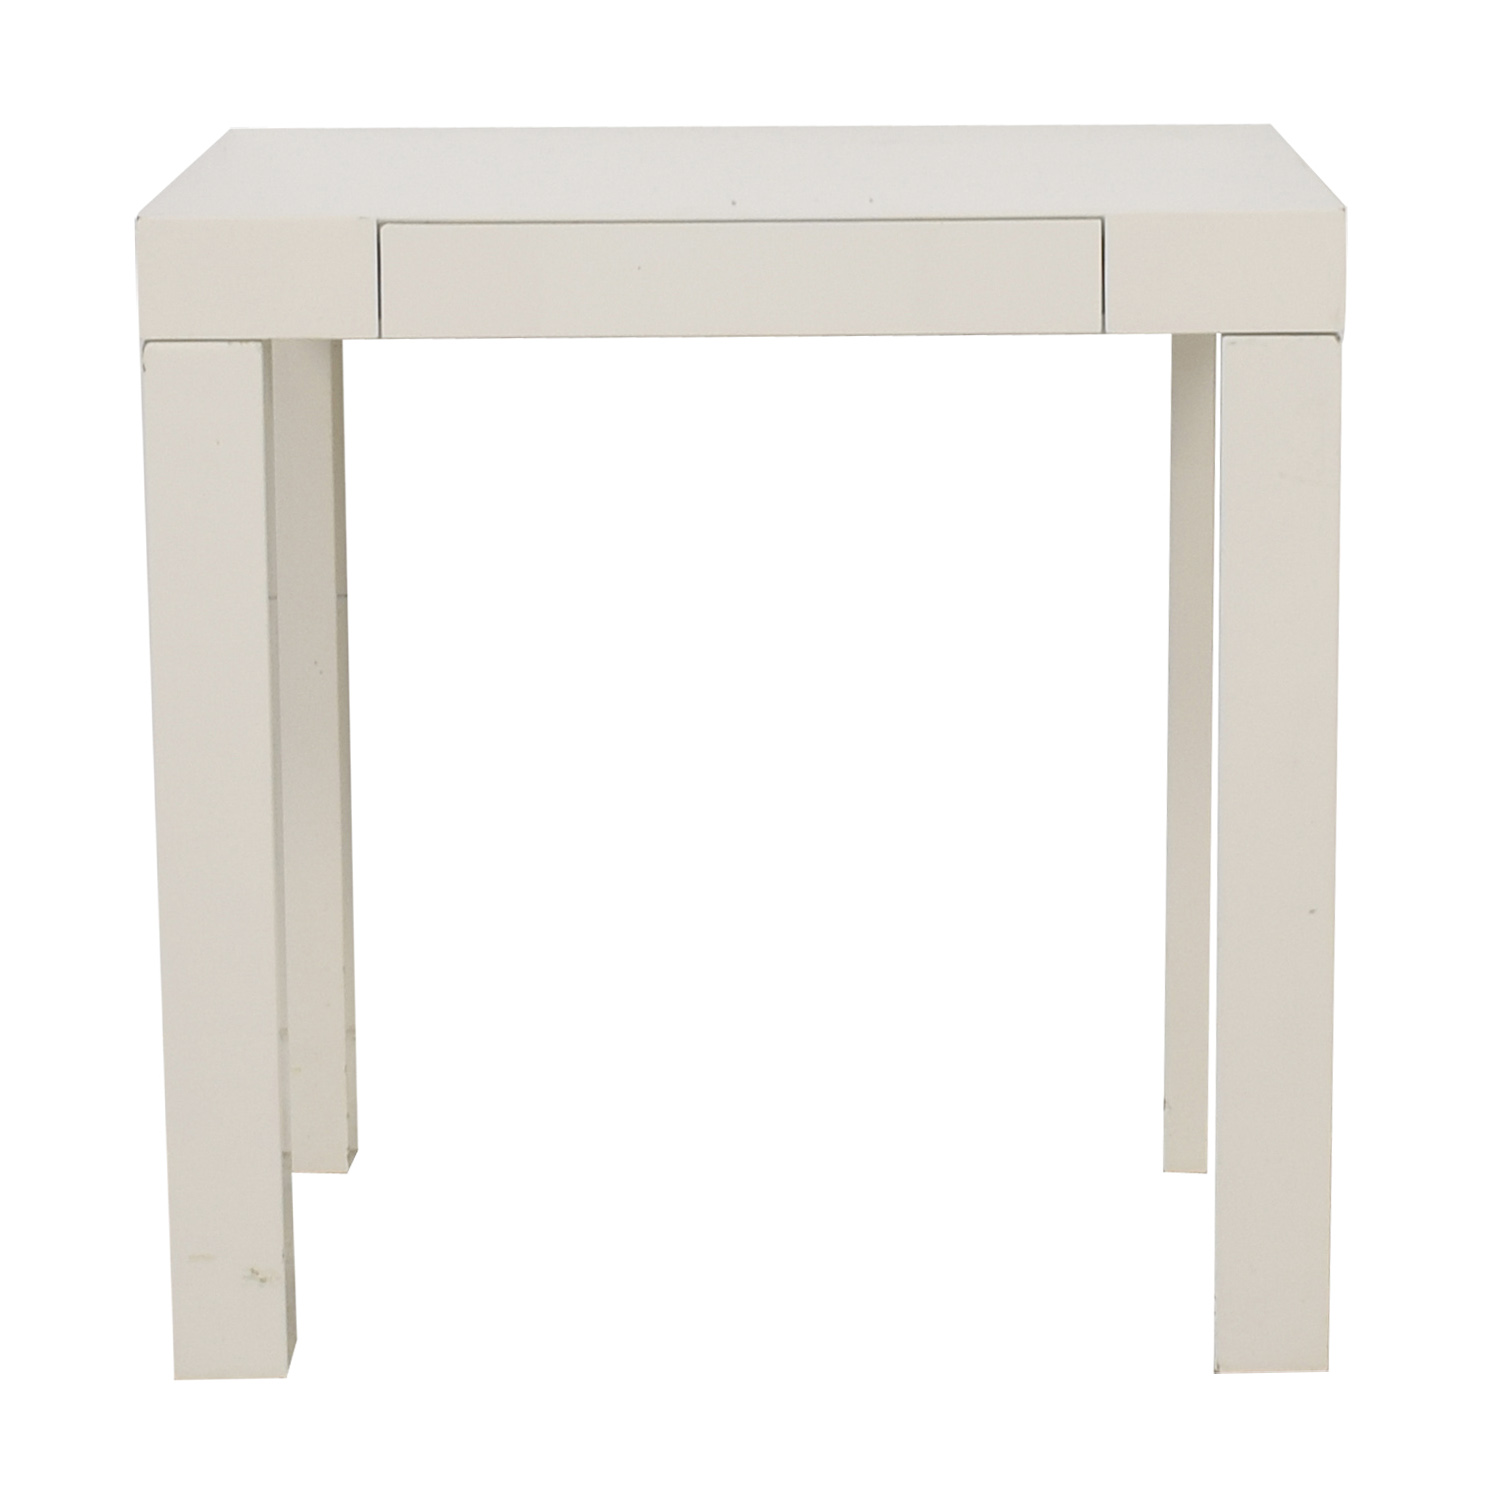 off west elm white mini parsons desk tables end table acme espresso wrought iron glass top patio super kmart furniture extra large coffee pet crate pipe plans unfinished mirrors